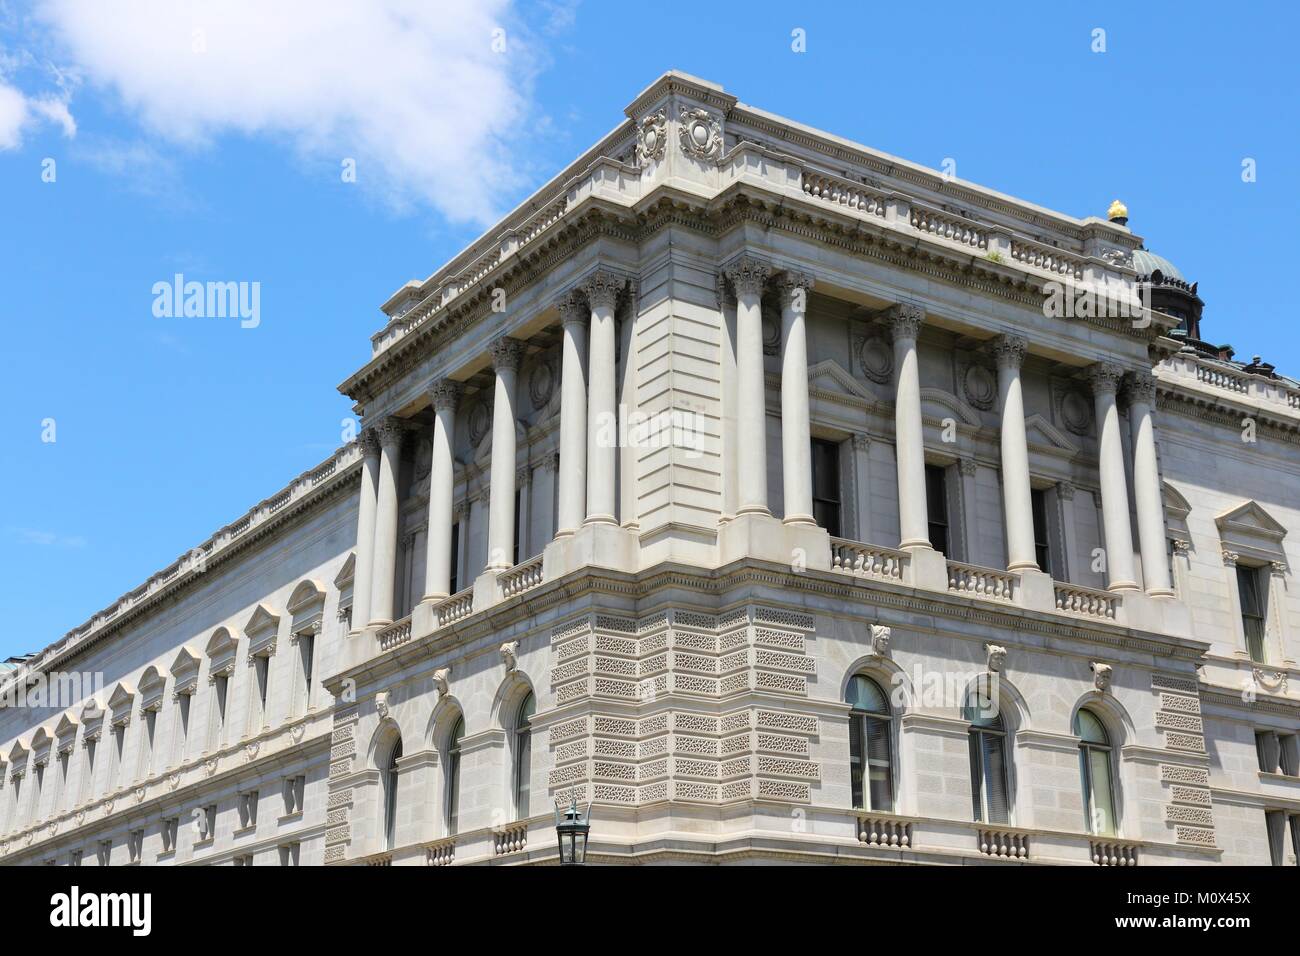 Washington DC, capital city of the United States. Famous Library of Congress. Stock Photo